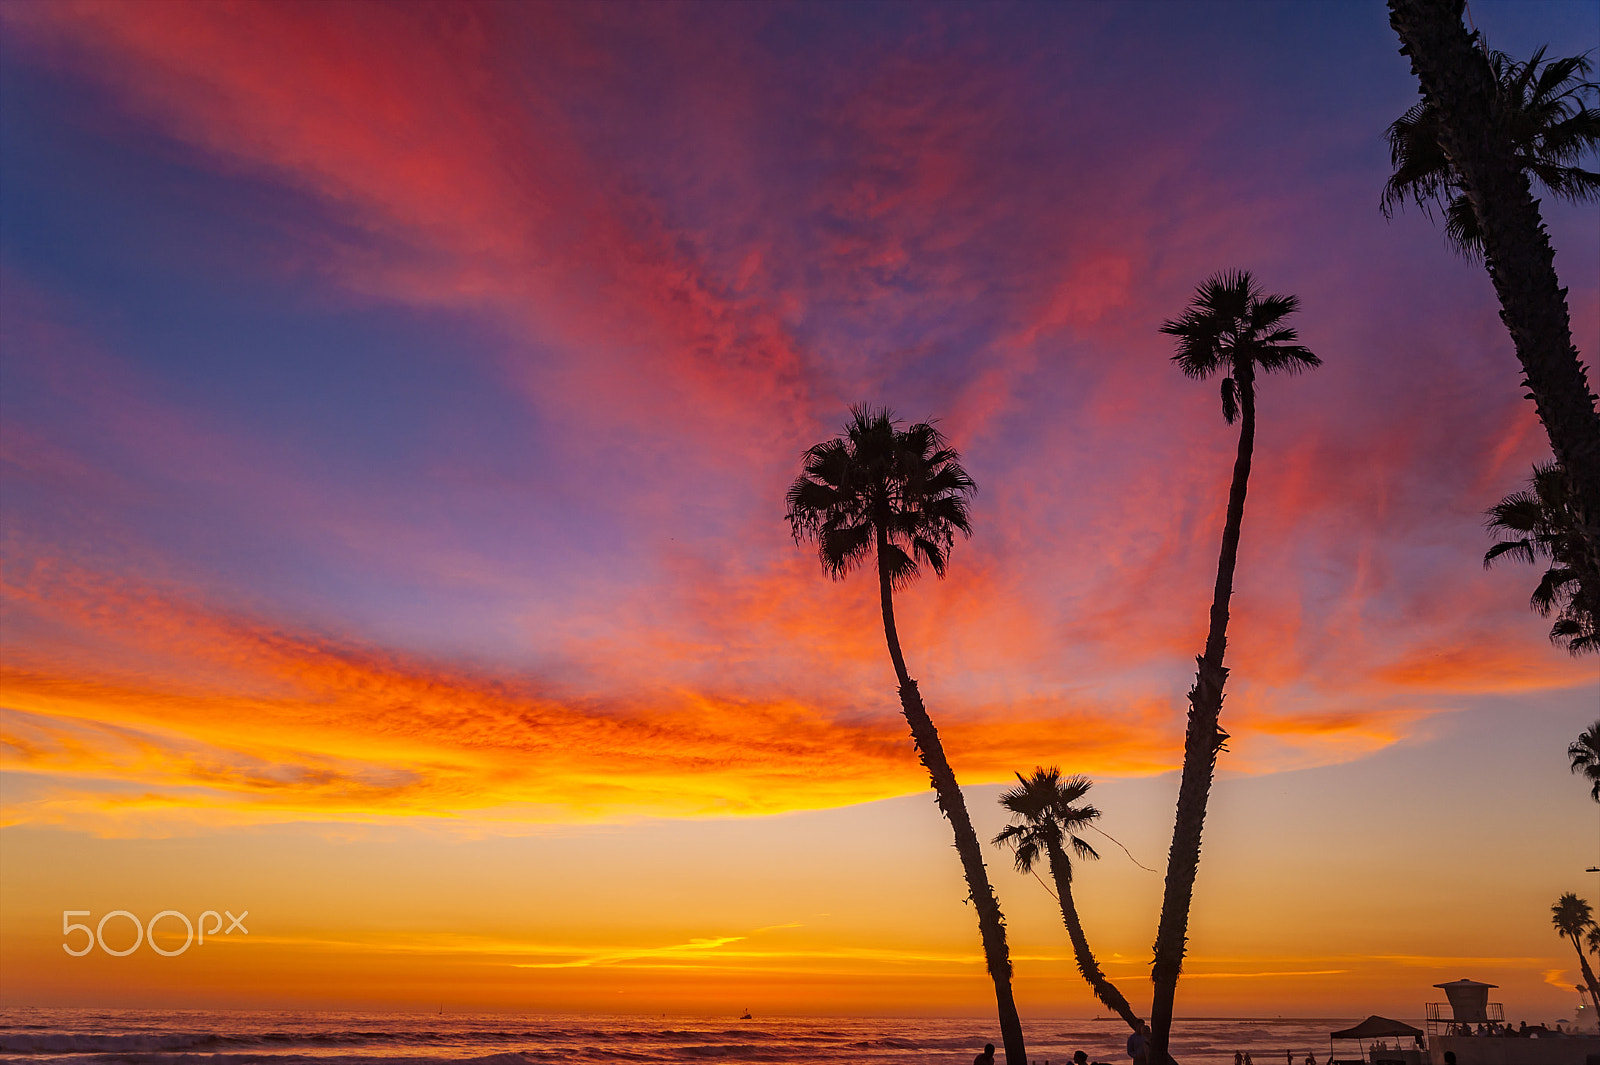 Nikon D700 sample photo. Fiery sunset at oceanside - august 14, 2015 photography